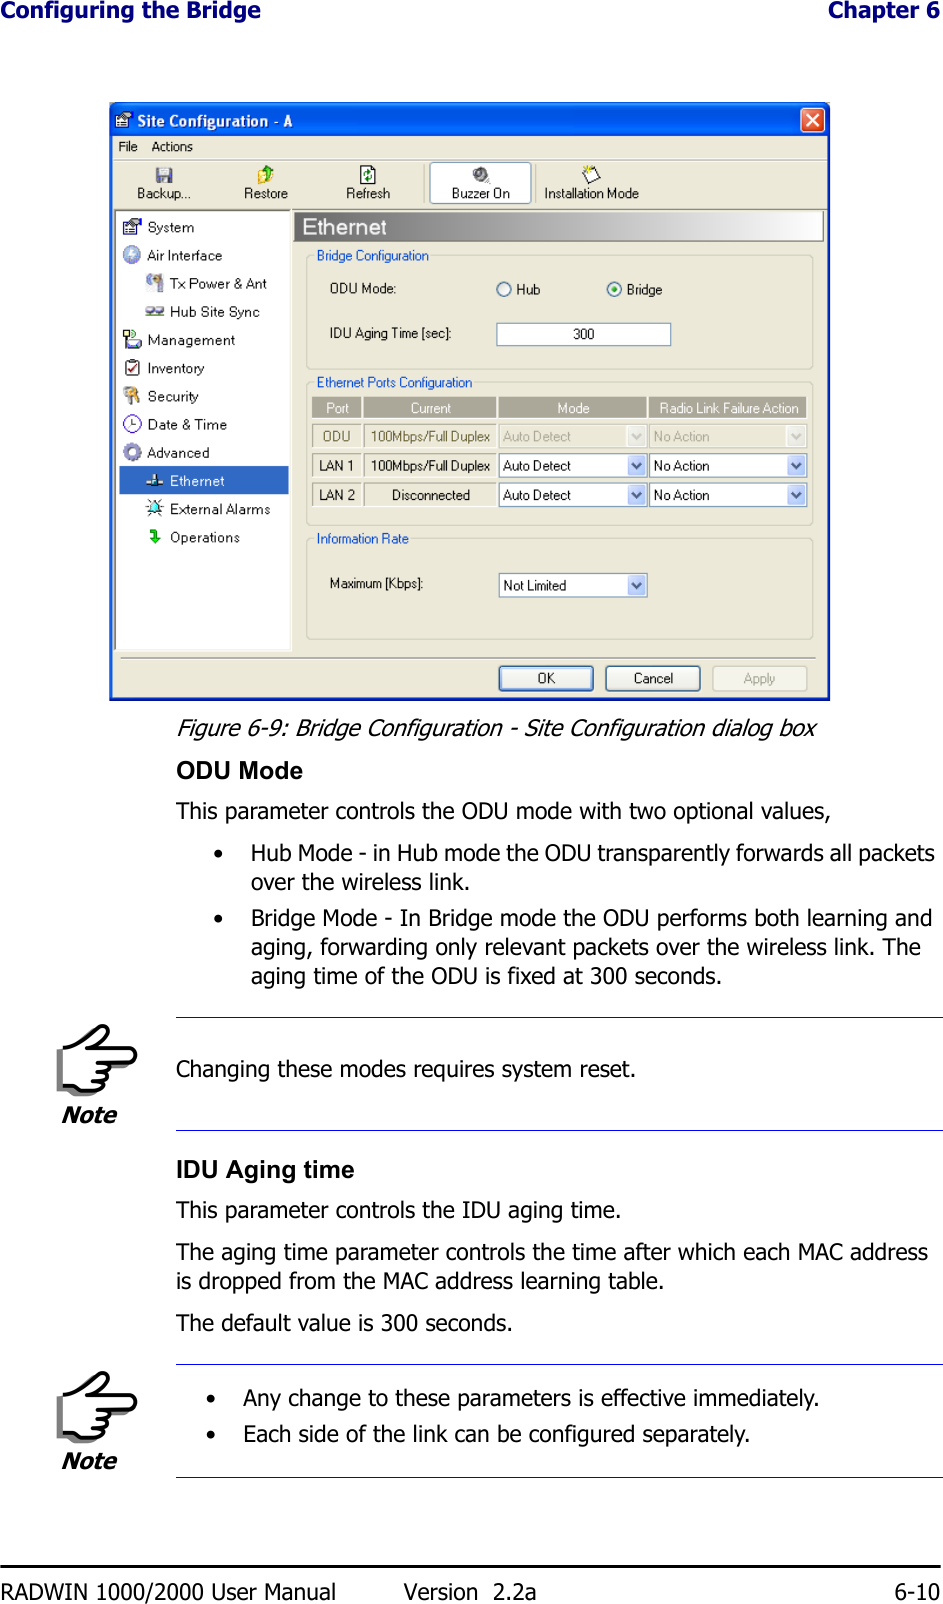 Configuring the Bridge  Chapter 6RADWIN 1000/2000 User Manual Version  2.2a 6-10Figure 6-9: Bridge Configuration - Site Configuration dialog boxODU ModeThis parameter controls the ODU mode with two optional values, • Hub Mode - in Hub mode the ODU transparently forwards all packets over the wireless link.• Bridge Mode - In Bridge mode the ODU performs both learning and aging, forwarding only relevant packets over the wireless link. The aging time of the ODU is fixed at 300 seconds.IDU Aging timeThis parameter controls the IDU aging time.The aging time parameter controls the time after which each MAC address is dropped from the MAC address learning table.The default value is 300 seconds.NoteChanging these modes requires system reset.Note• Any change to these parameters is effective immediately.• Each side of the link can be configured separately.